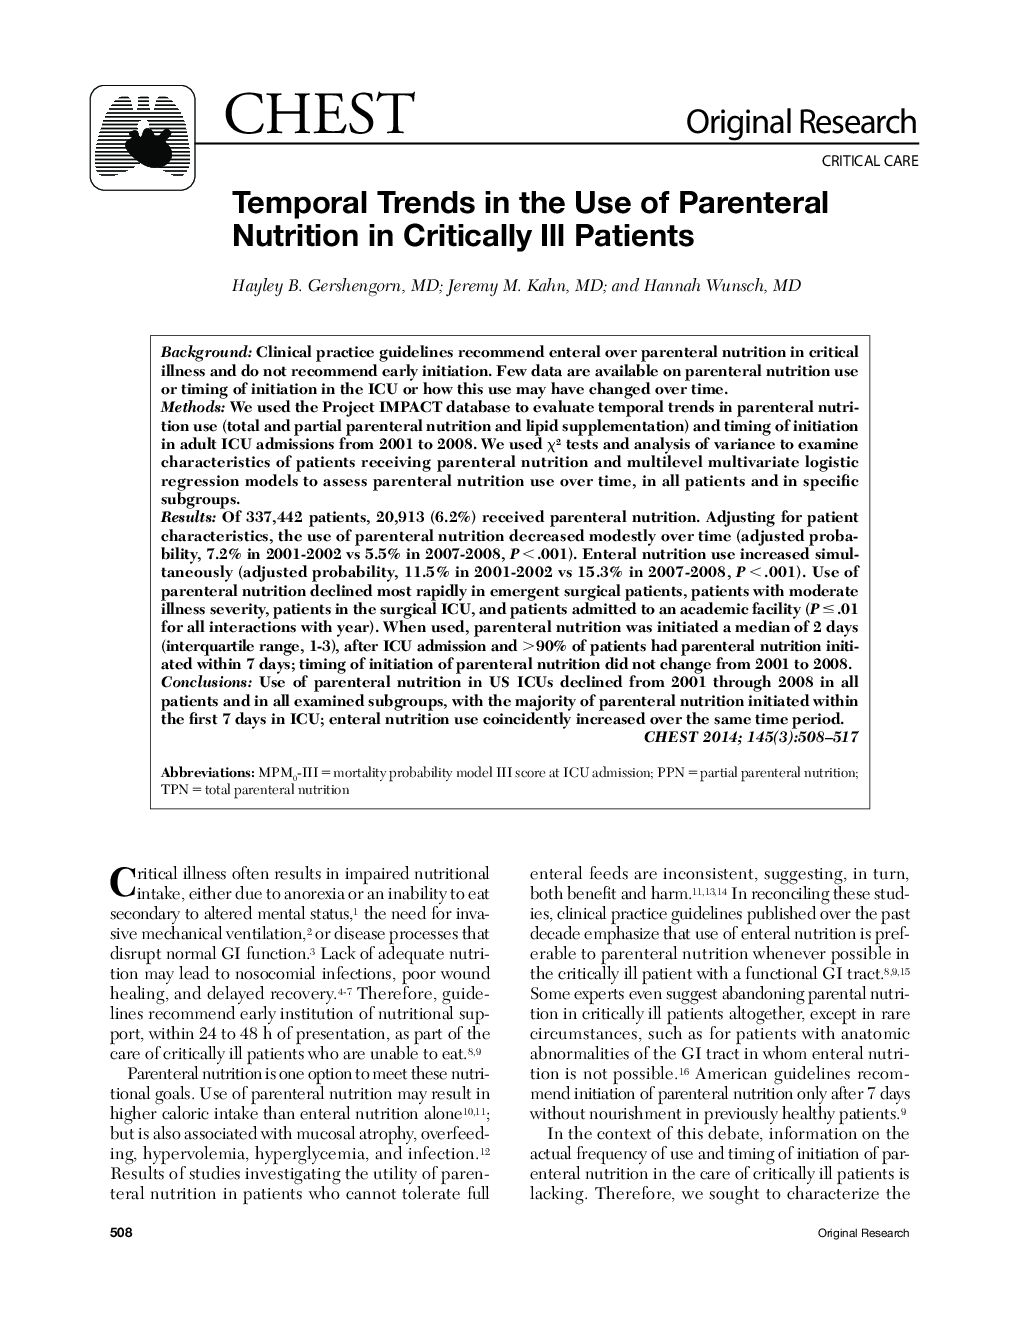 Temporal Trends in the Use of Parenteral Nutrition in Critically Ill Patients 